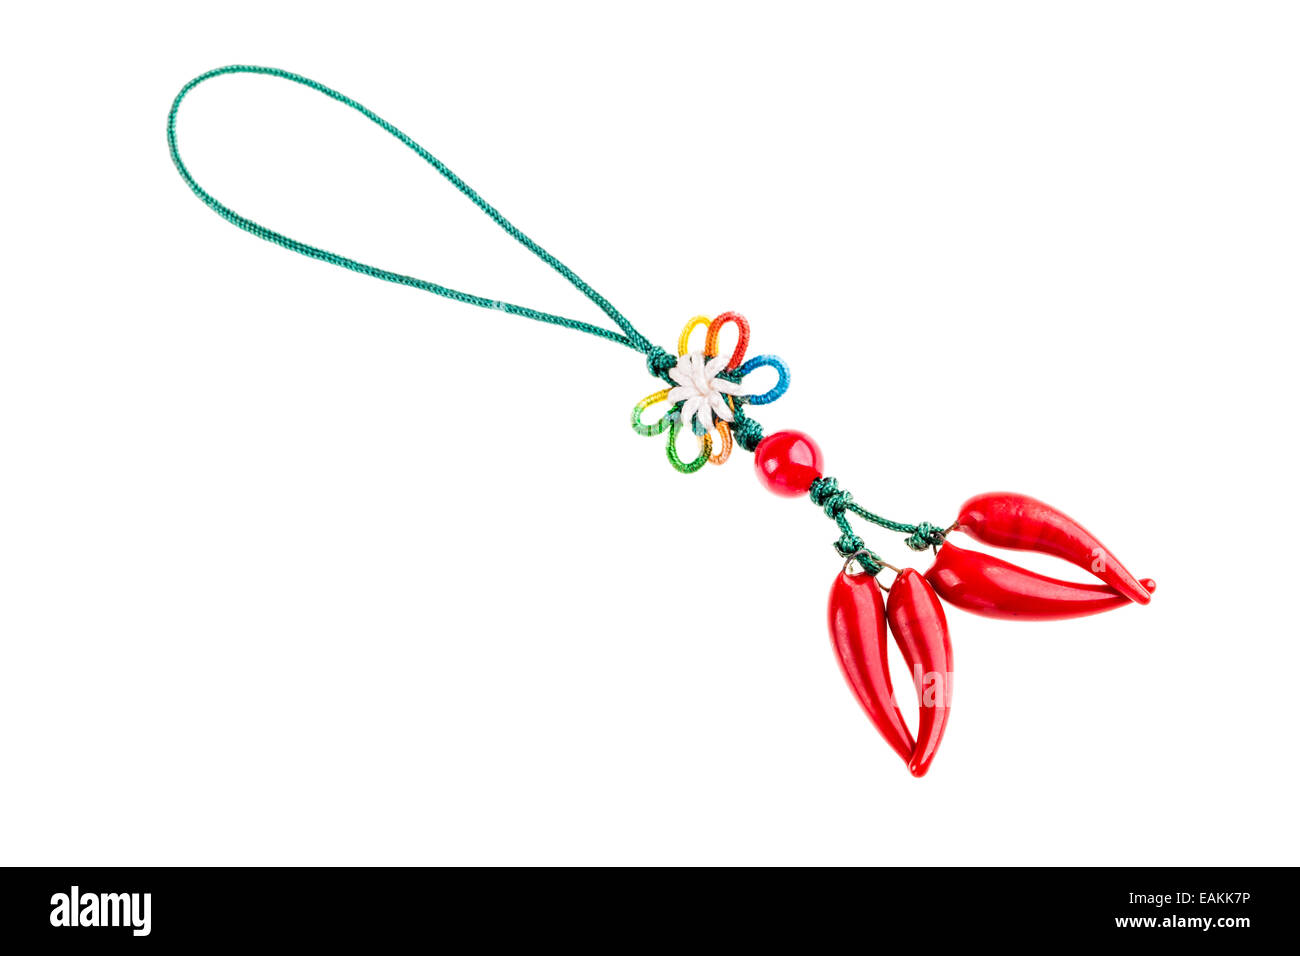 a typical neapolitan lucky charm talisman isolated over a white background Stock Photo